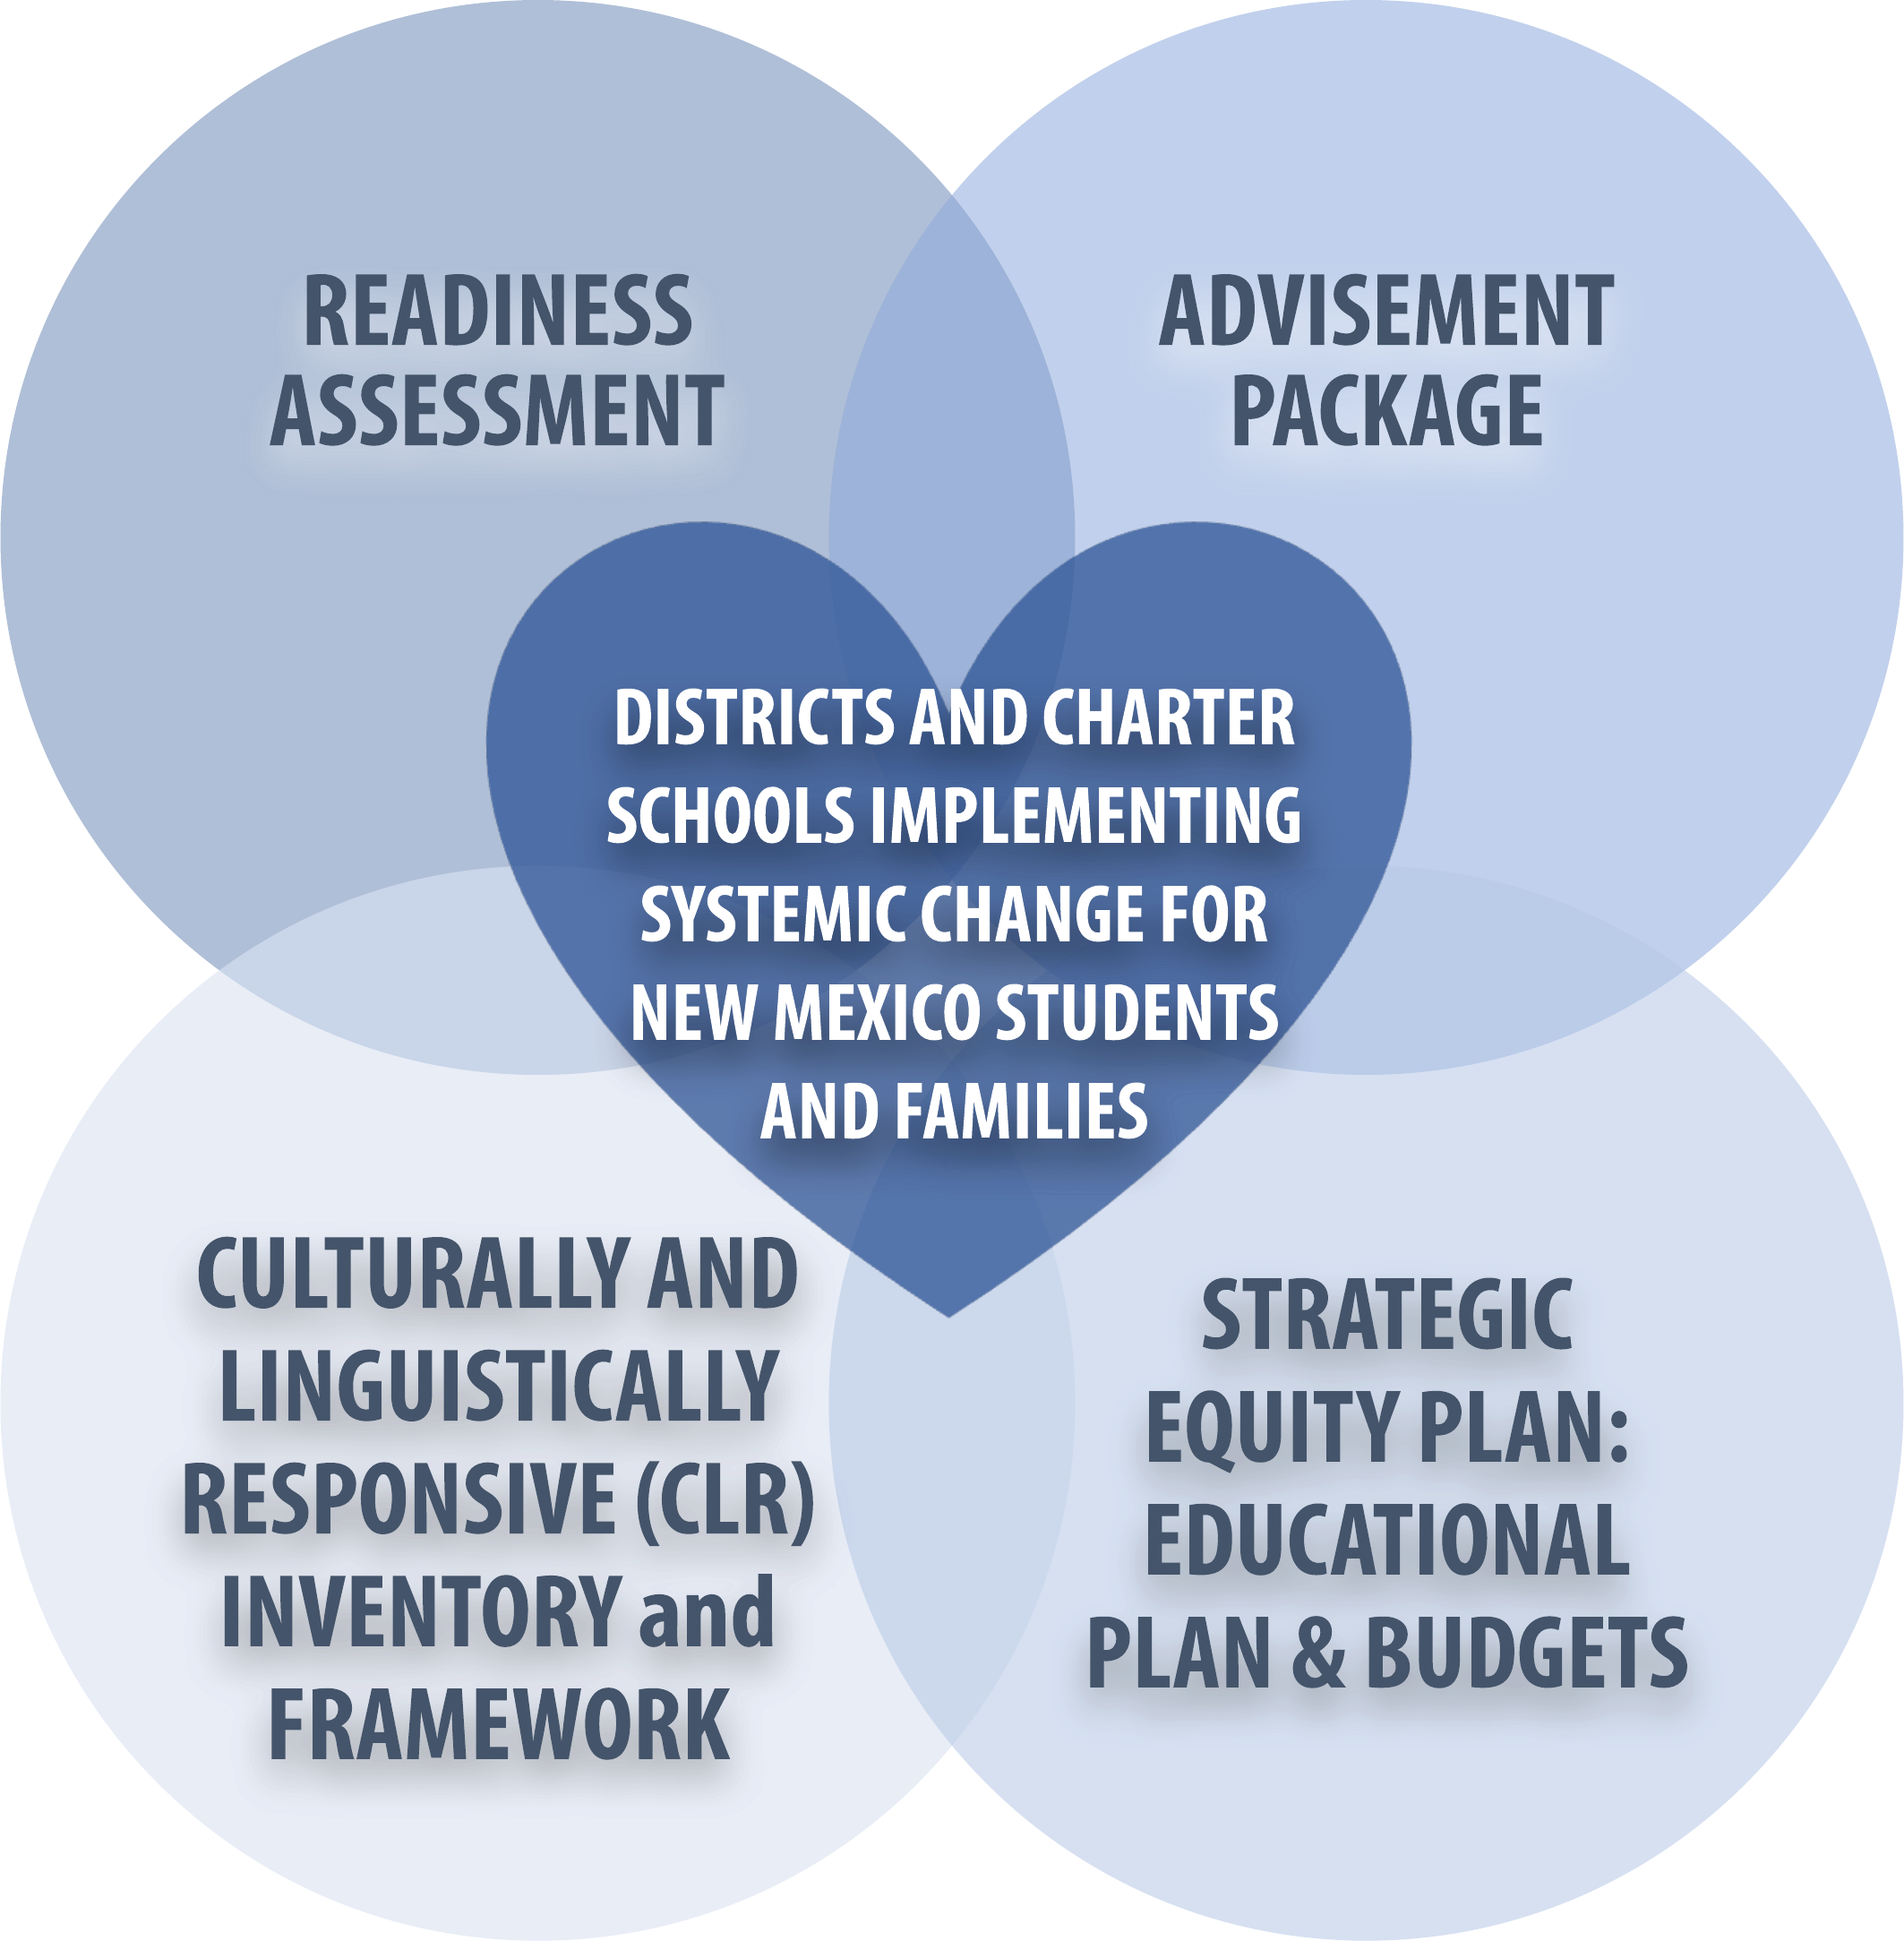 Districts and charter schools initiating systemic change for New Mexico Students and Families